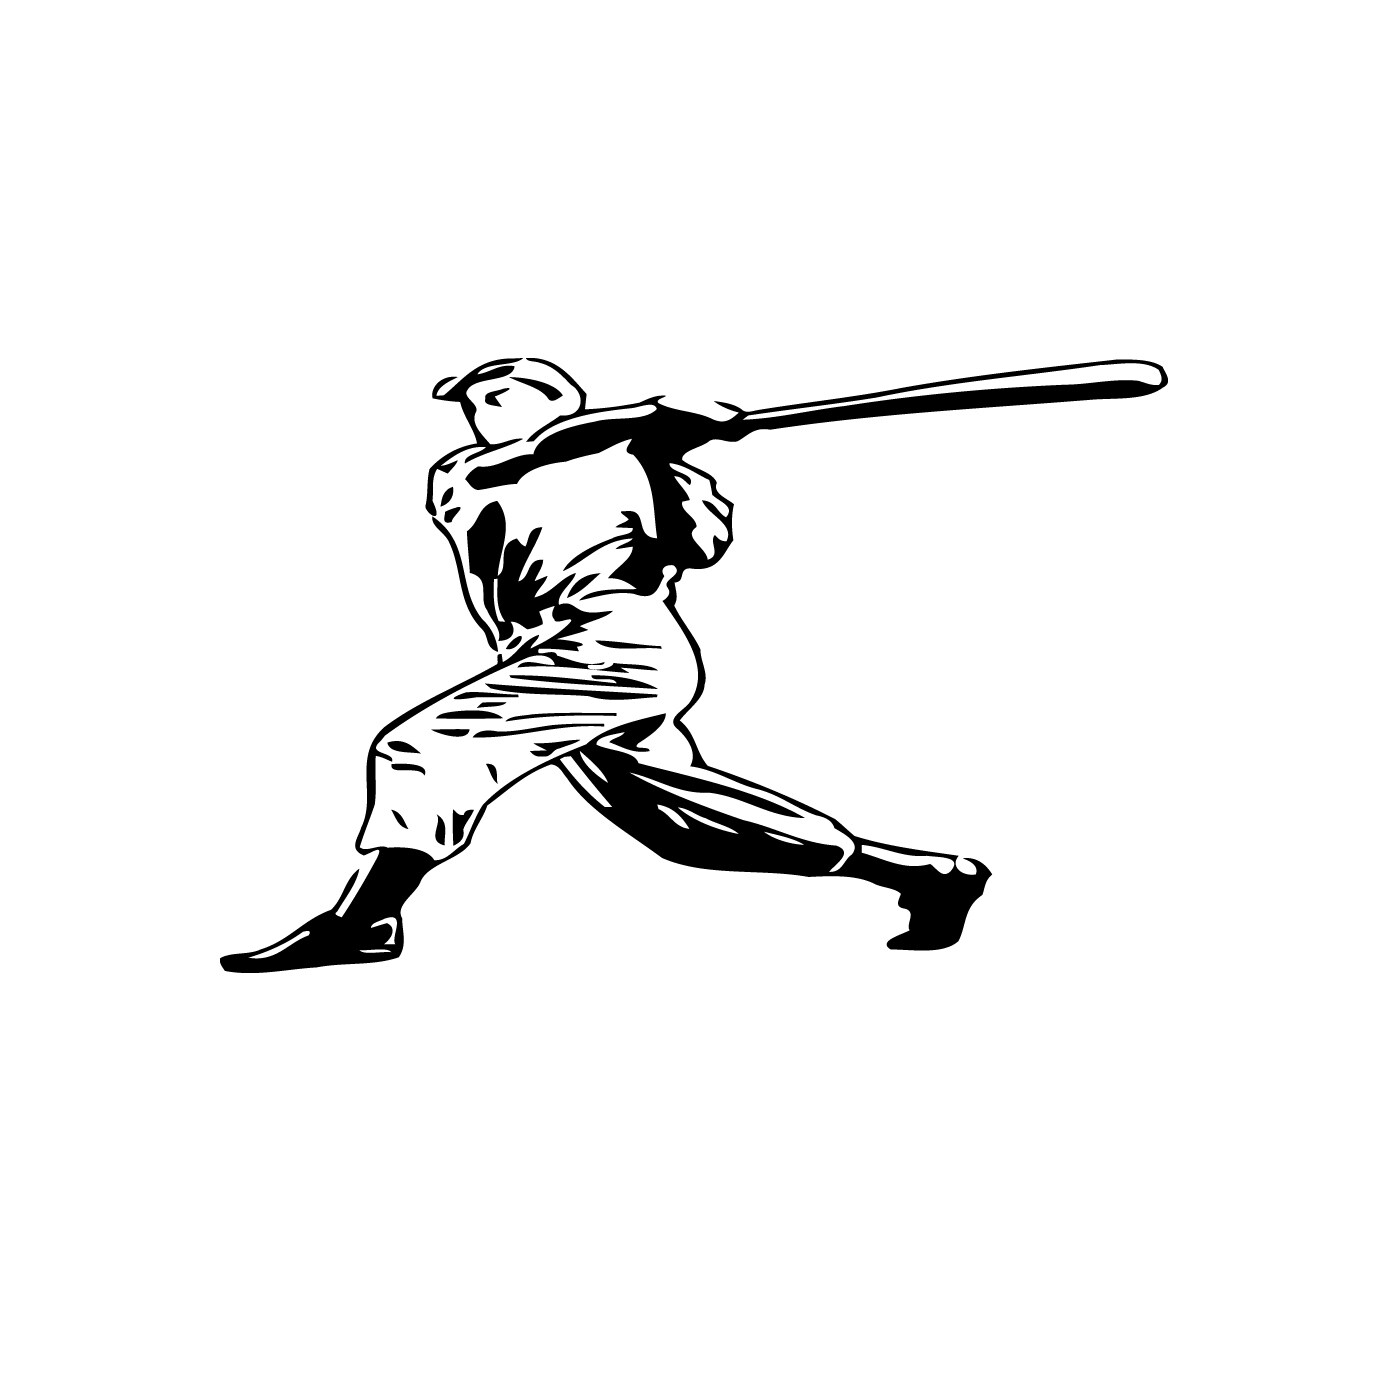 Swinging Baseball Player Game Vinyl Wall Art Decal (BlackEasy to apply with instructions includedDimensions 22 inches wide x 35 inches long )